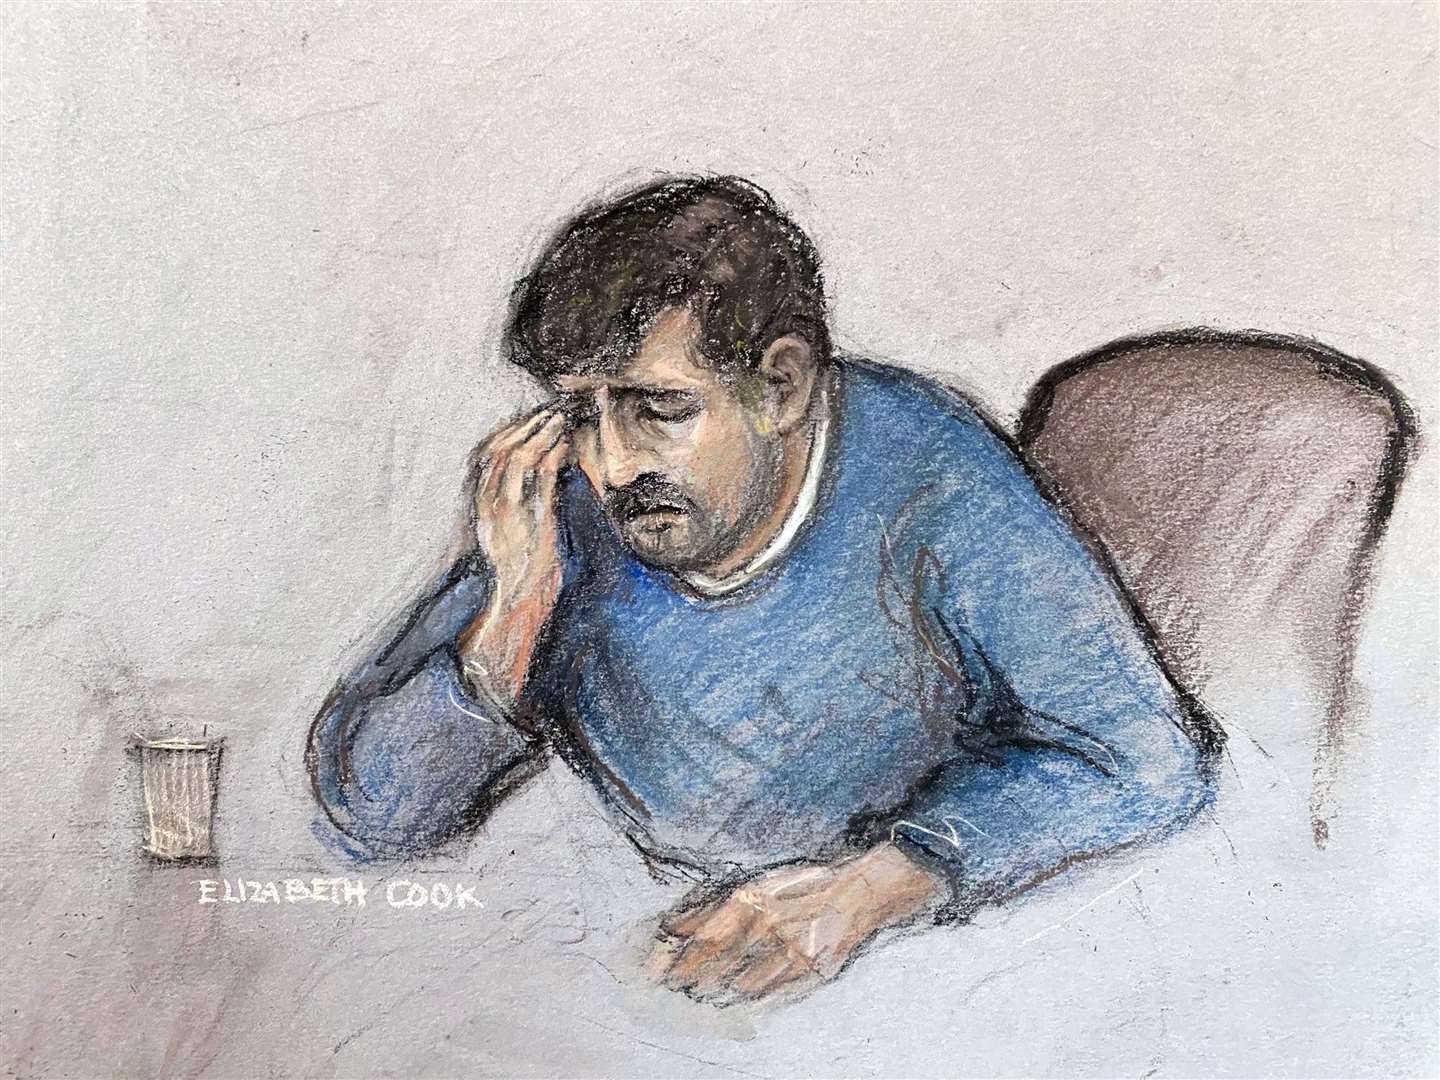 Court artist sketch by Elizabeth Cook of Thomas Cashman, 34, wiping away tears in the dock after being found guilty at Manchester Crown Court of murdering nine-year-old Olivia Pratt-Korbel (Elizabeth Cook/PA)